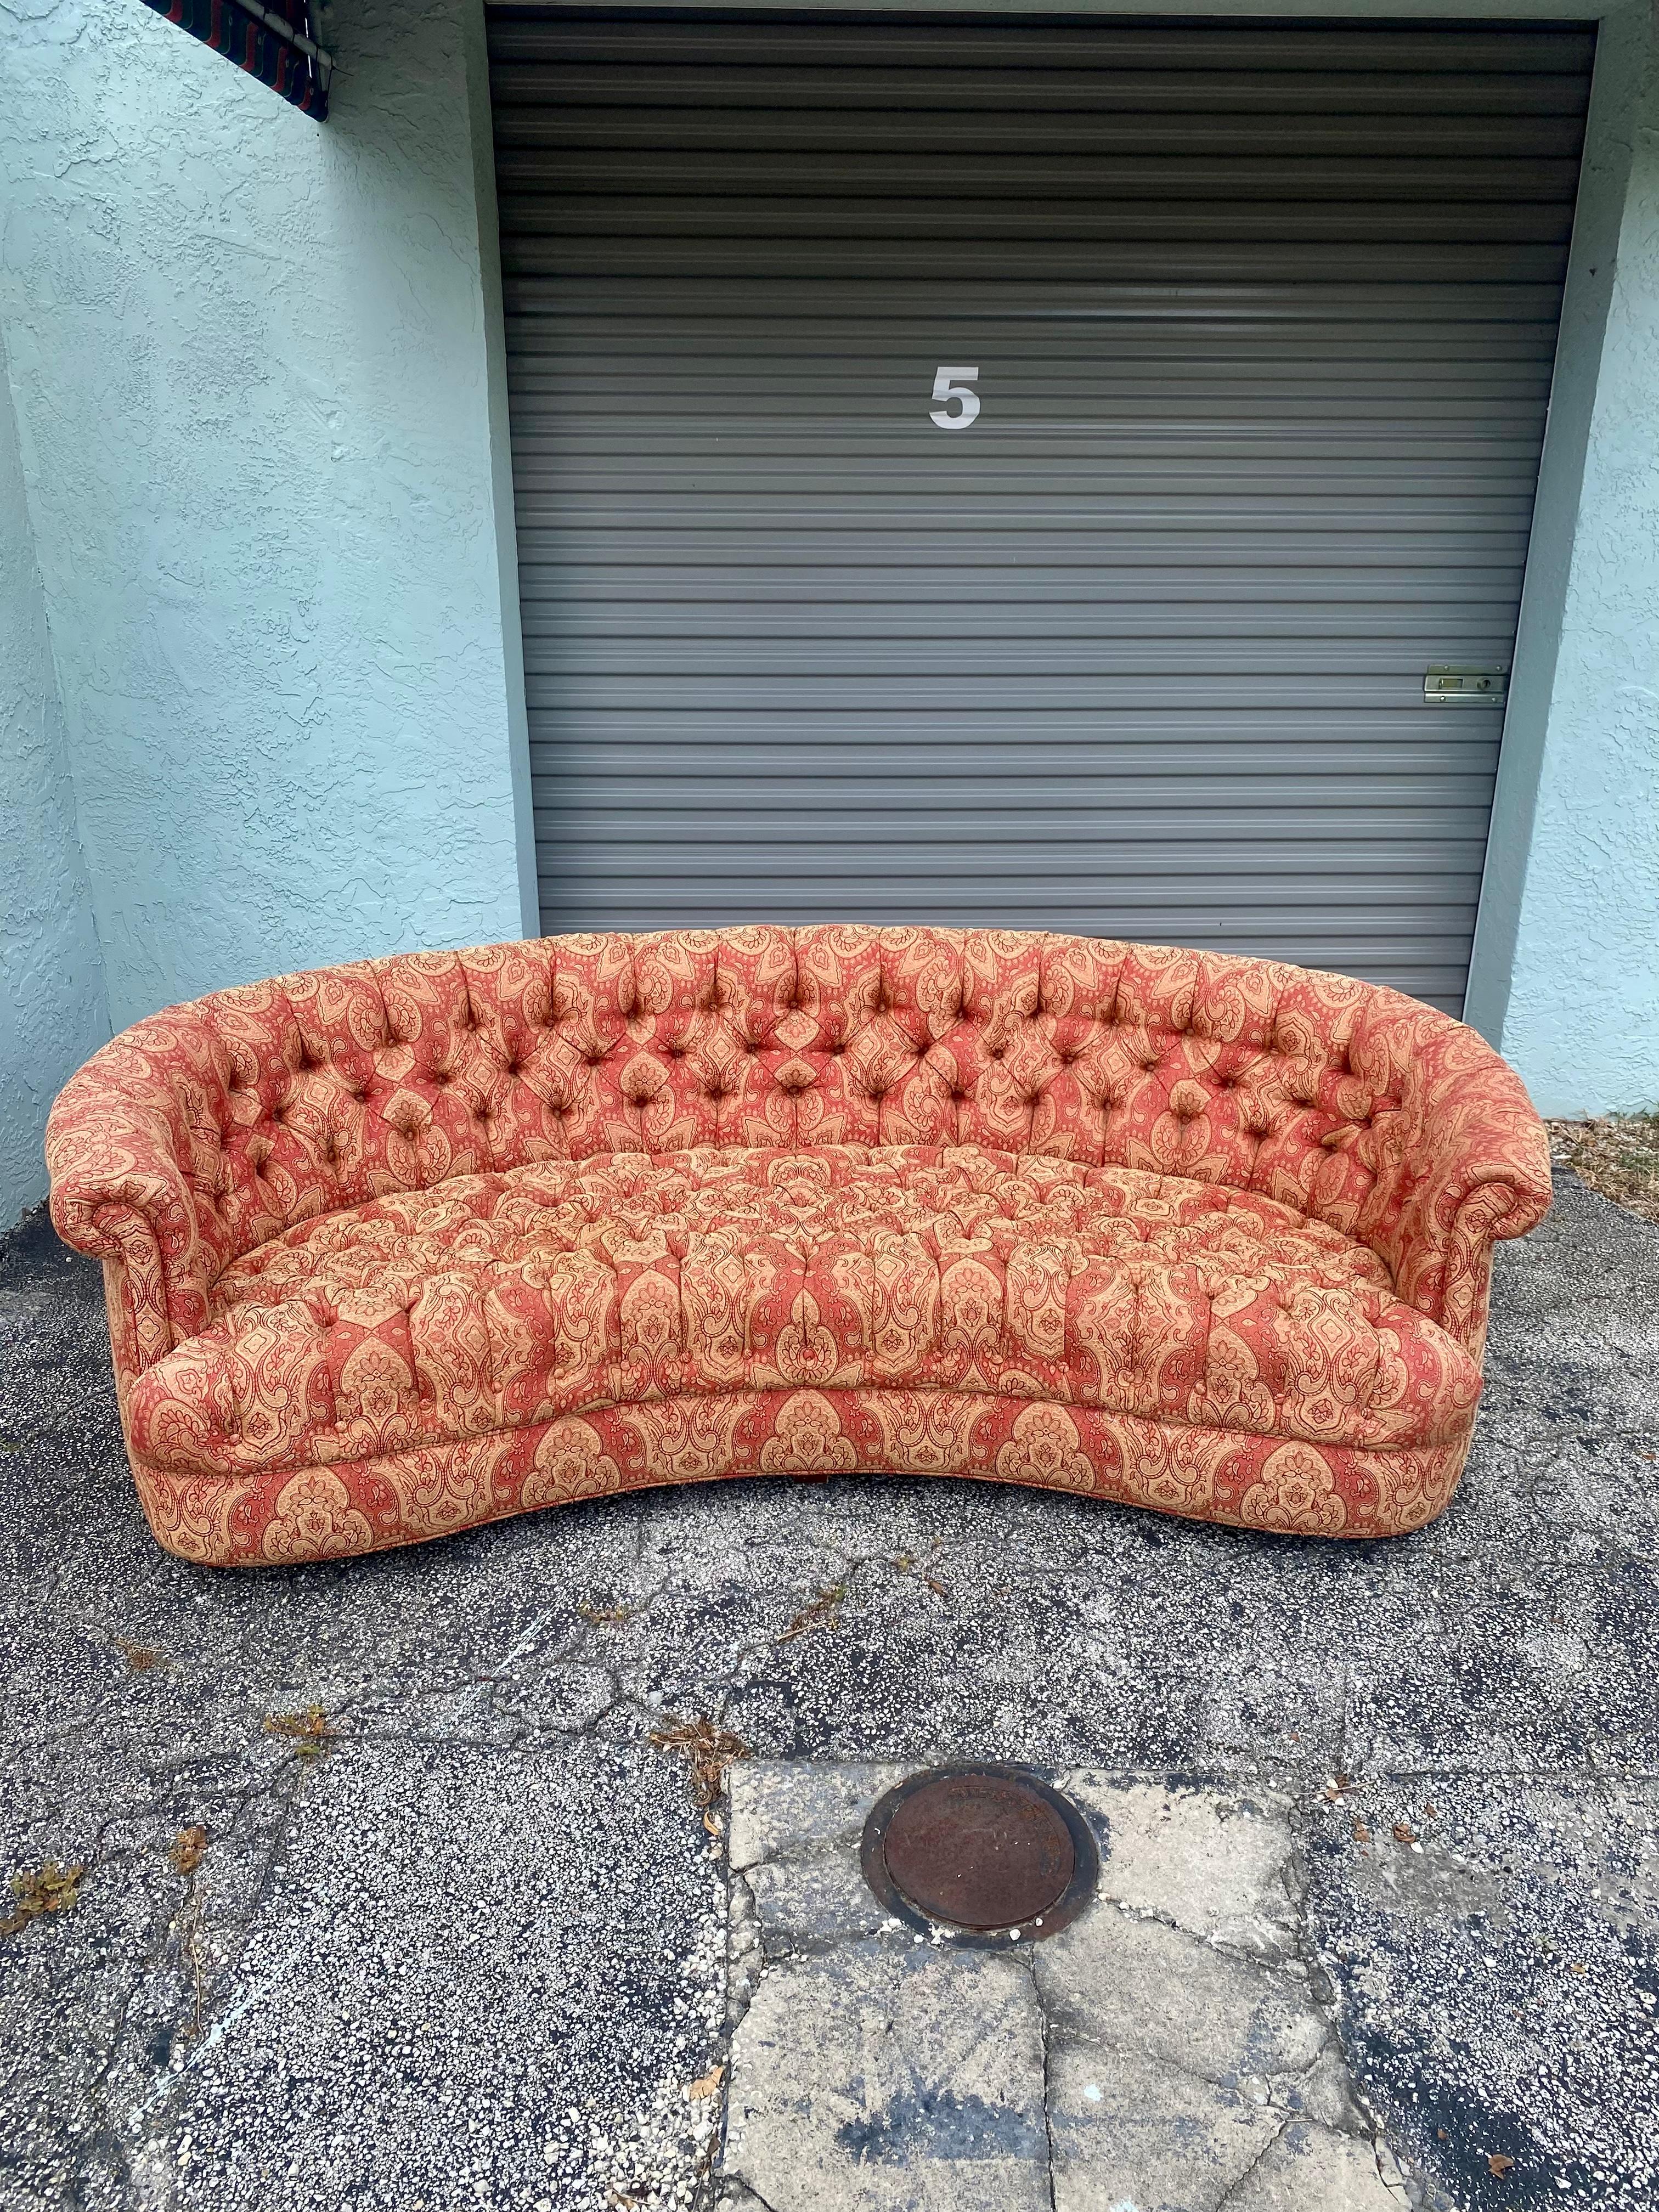 On offer on this occasion is one of the most stunning, Chesterfield curved sofa you could hope to find. This is an ultra-rare opportunity to acquire what is, unequivocally, the best of the best, it being a most spectacular and beautifully-presented